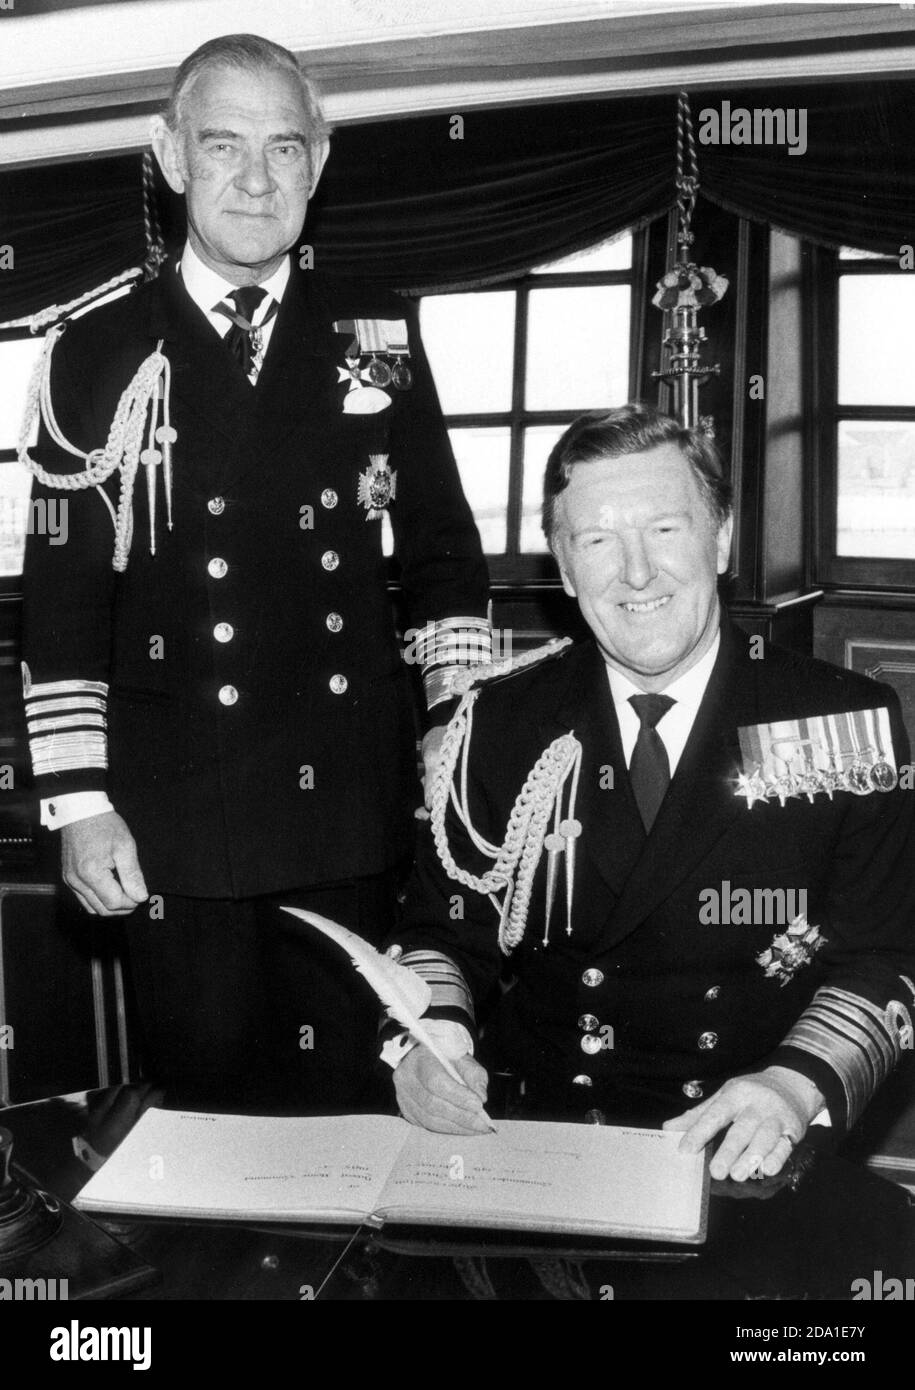 THE NEW C. IN C. PORTSMOUTH NAVAL HOME COMMAND ADMIRAL SIR PETER STANFORD ABOARD HMS VICTORY THE CHANGE OF COMMAND CEREMONY AT PORTSMOUTH NAVAL BASE. HE IS BVEHIND  THE RETIRING C. IN C. ADMIRAL SIR DENMNIS CASSIDI. 1984  PORTSMOUTH. Stock Photo